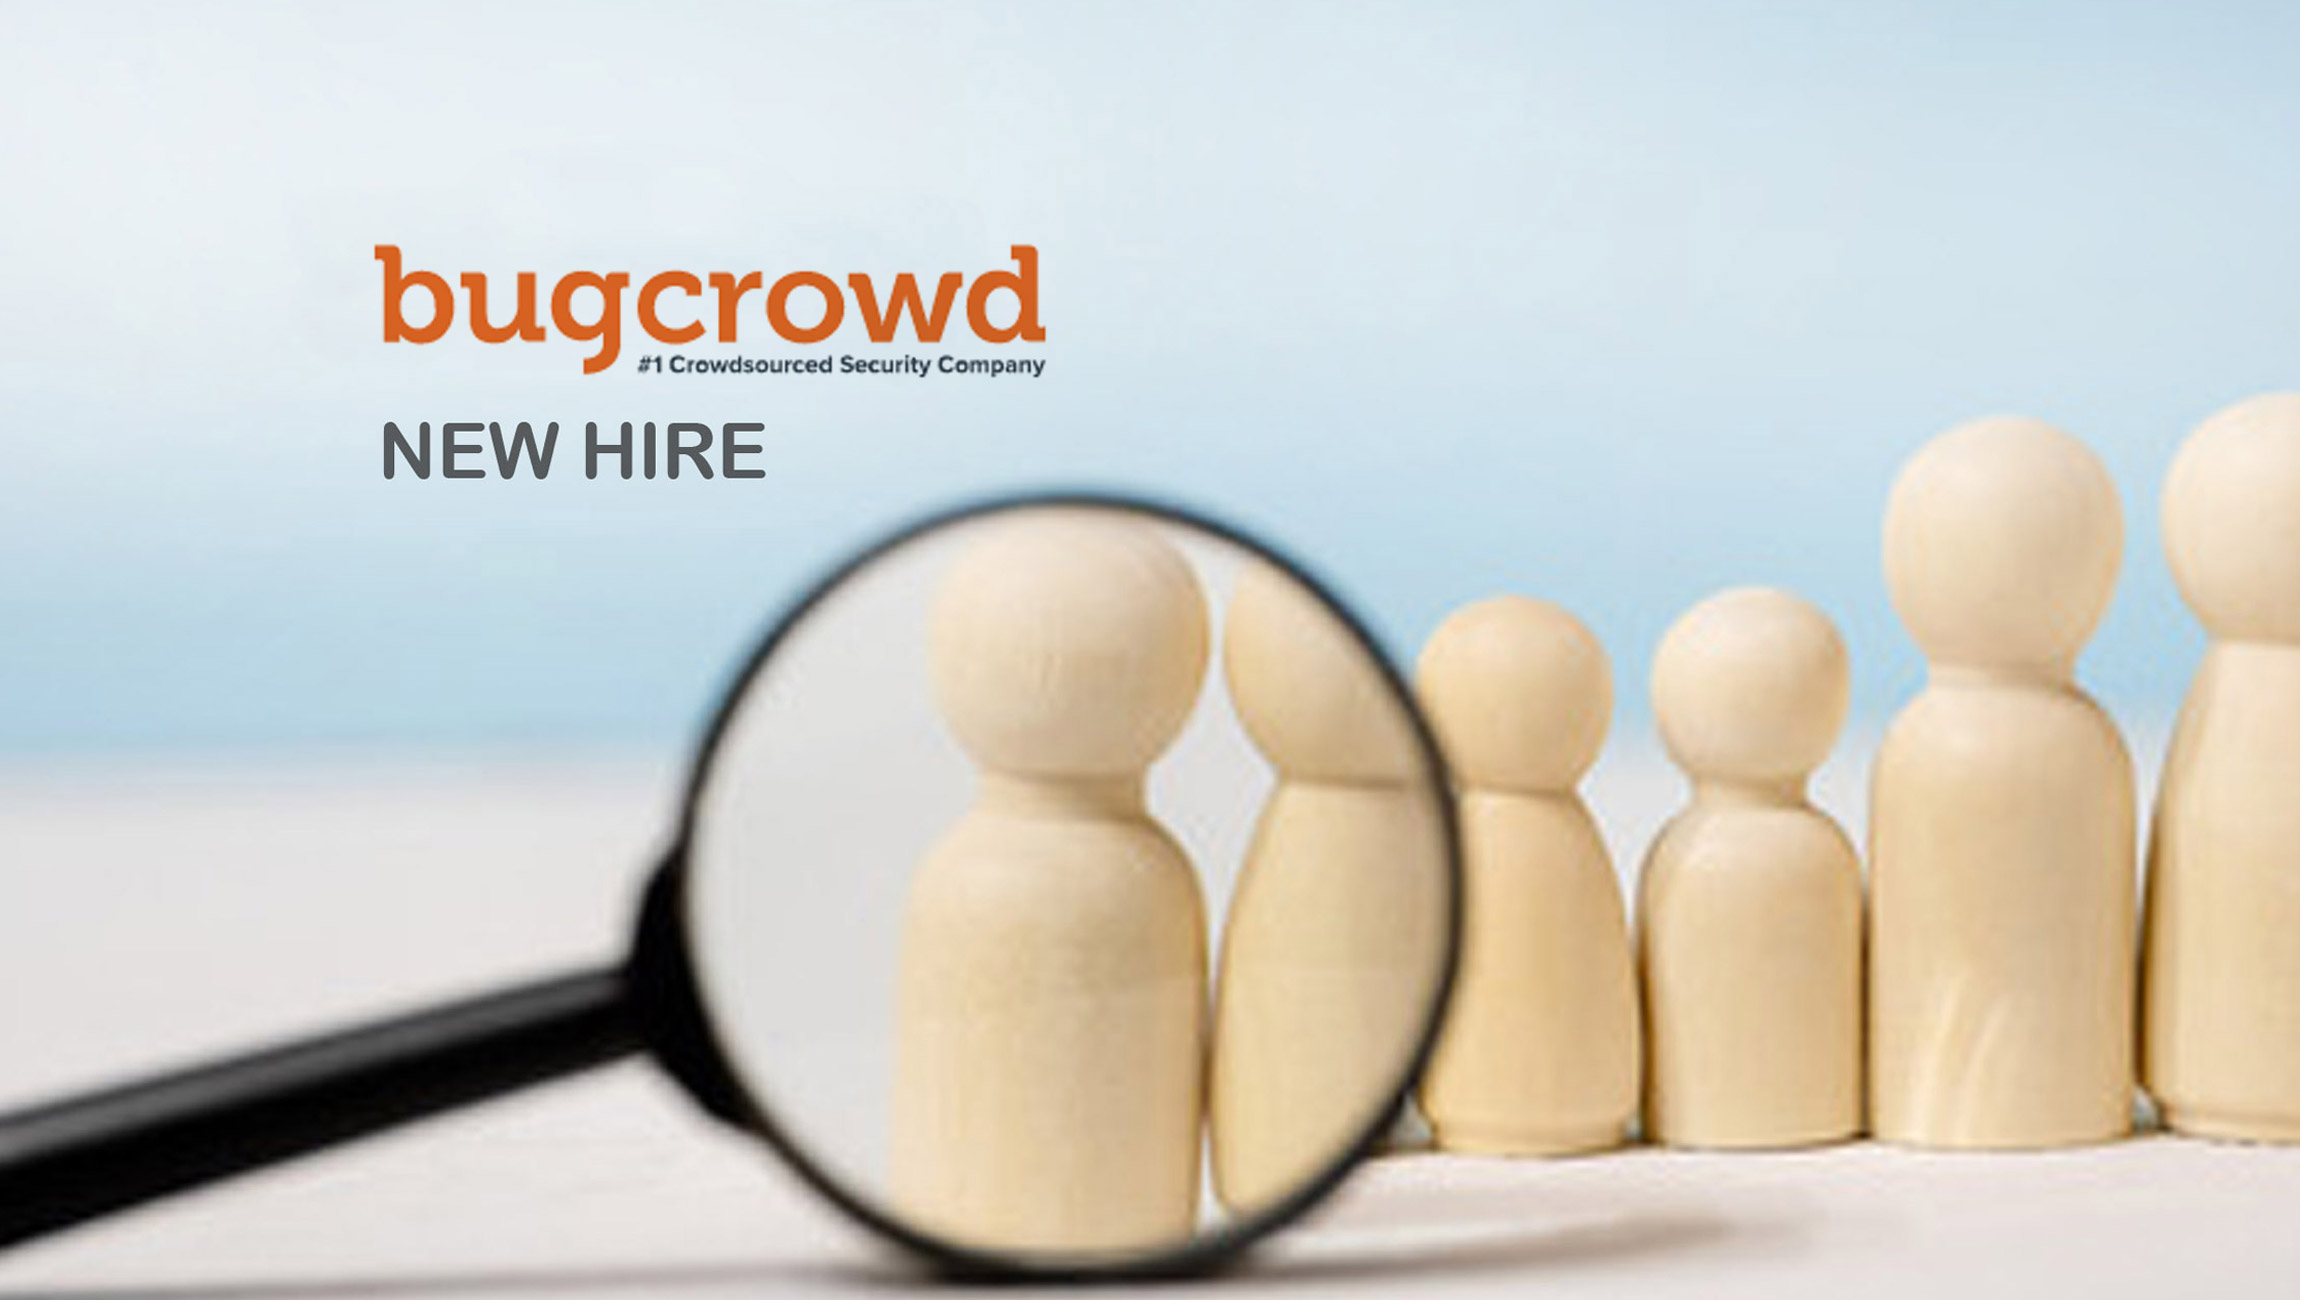 Bugcrowd Expands Leadership Team With Strategic Hires Focused On Growth and Customer Success